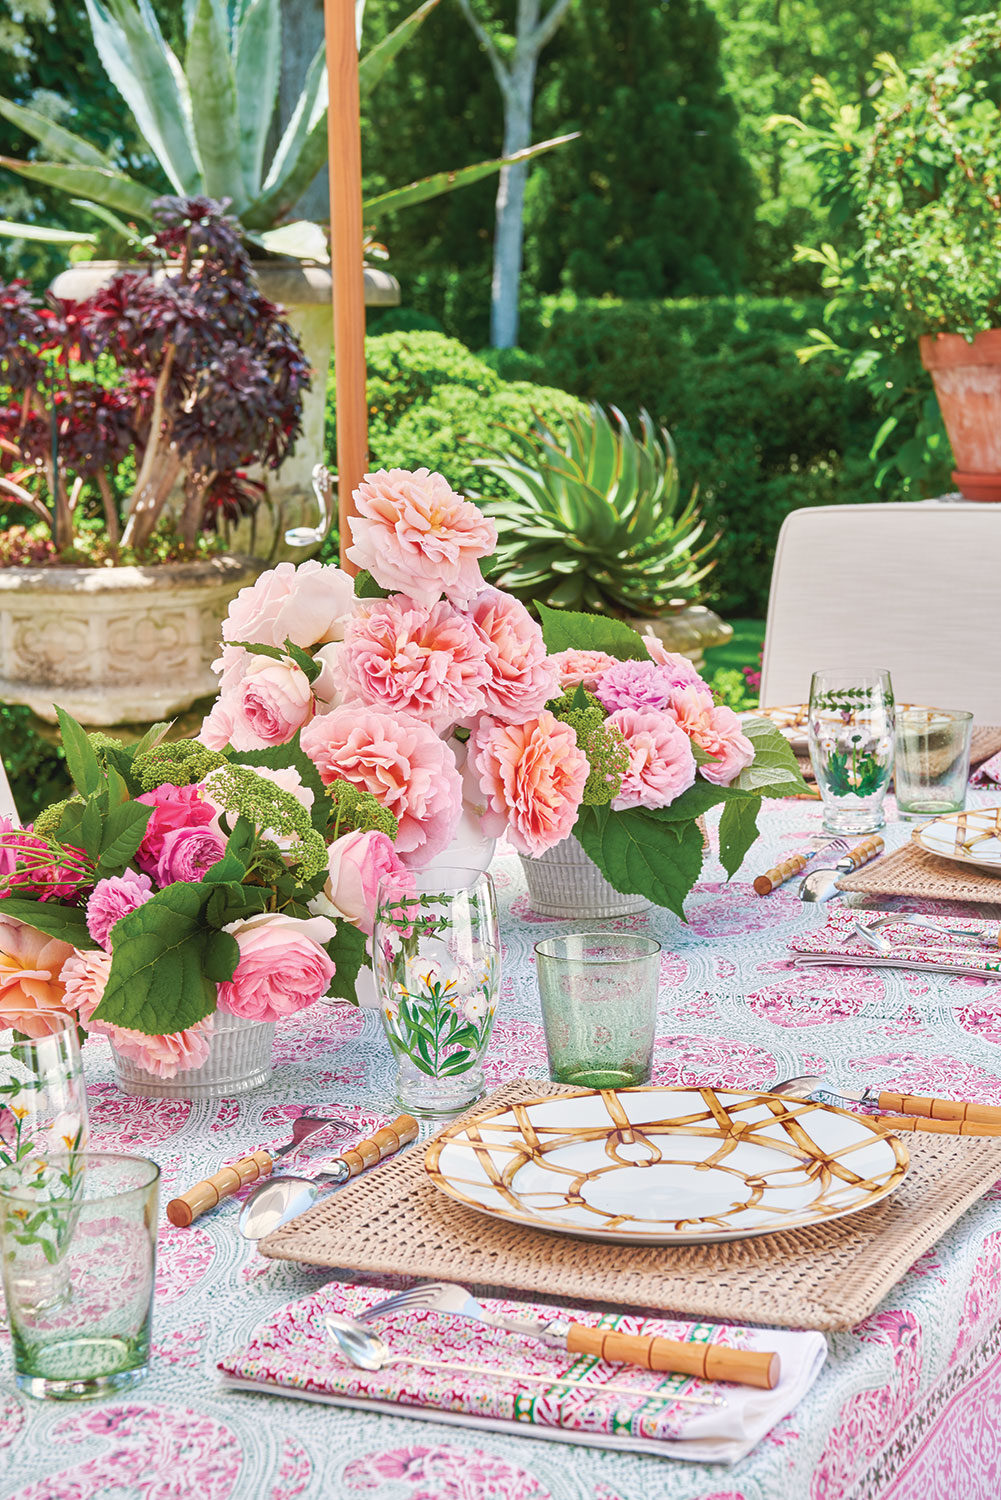 When houseguests are along for the weekend, Moss indulges another passion: setting a beautiful table for an alfresco meal.